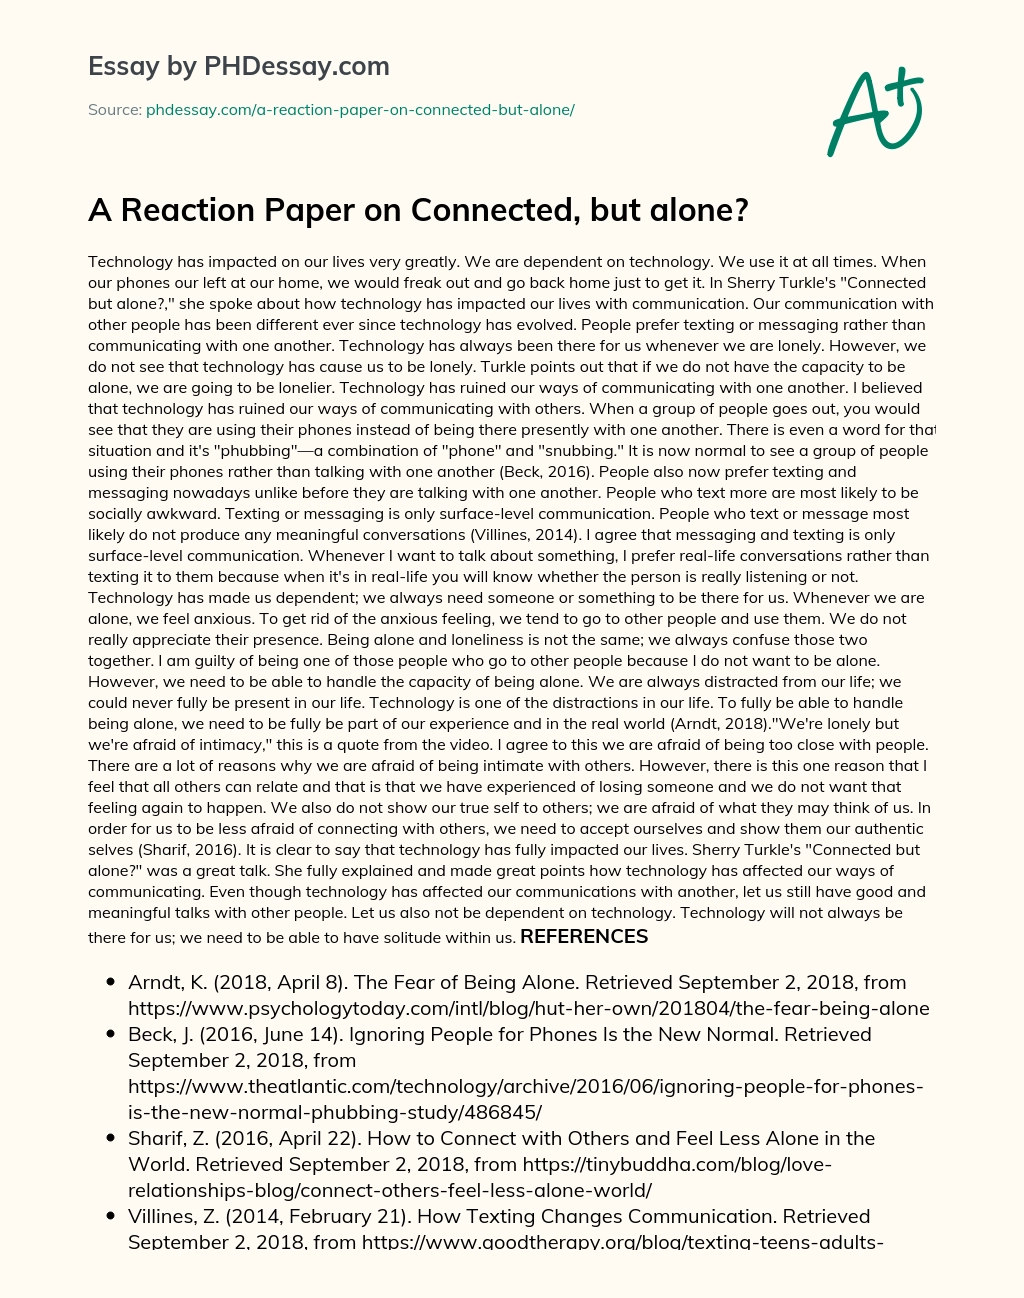 A Reaction Paper on Connected, but alone? essay